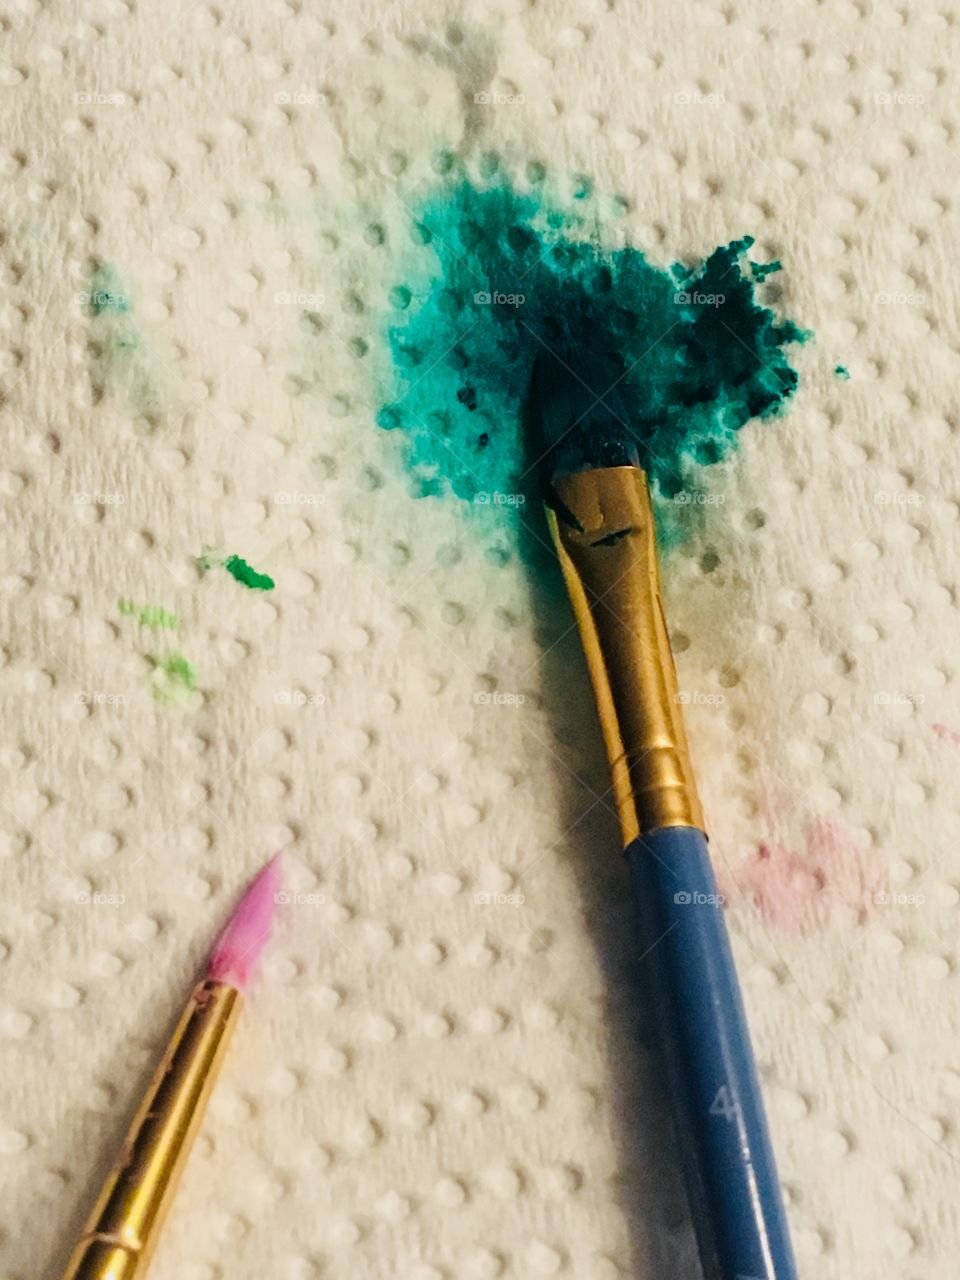 A close up of two used paint brushes on a paper towel. One of them is staining the paper towel a blue/green color 